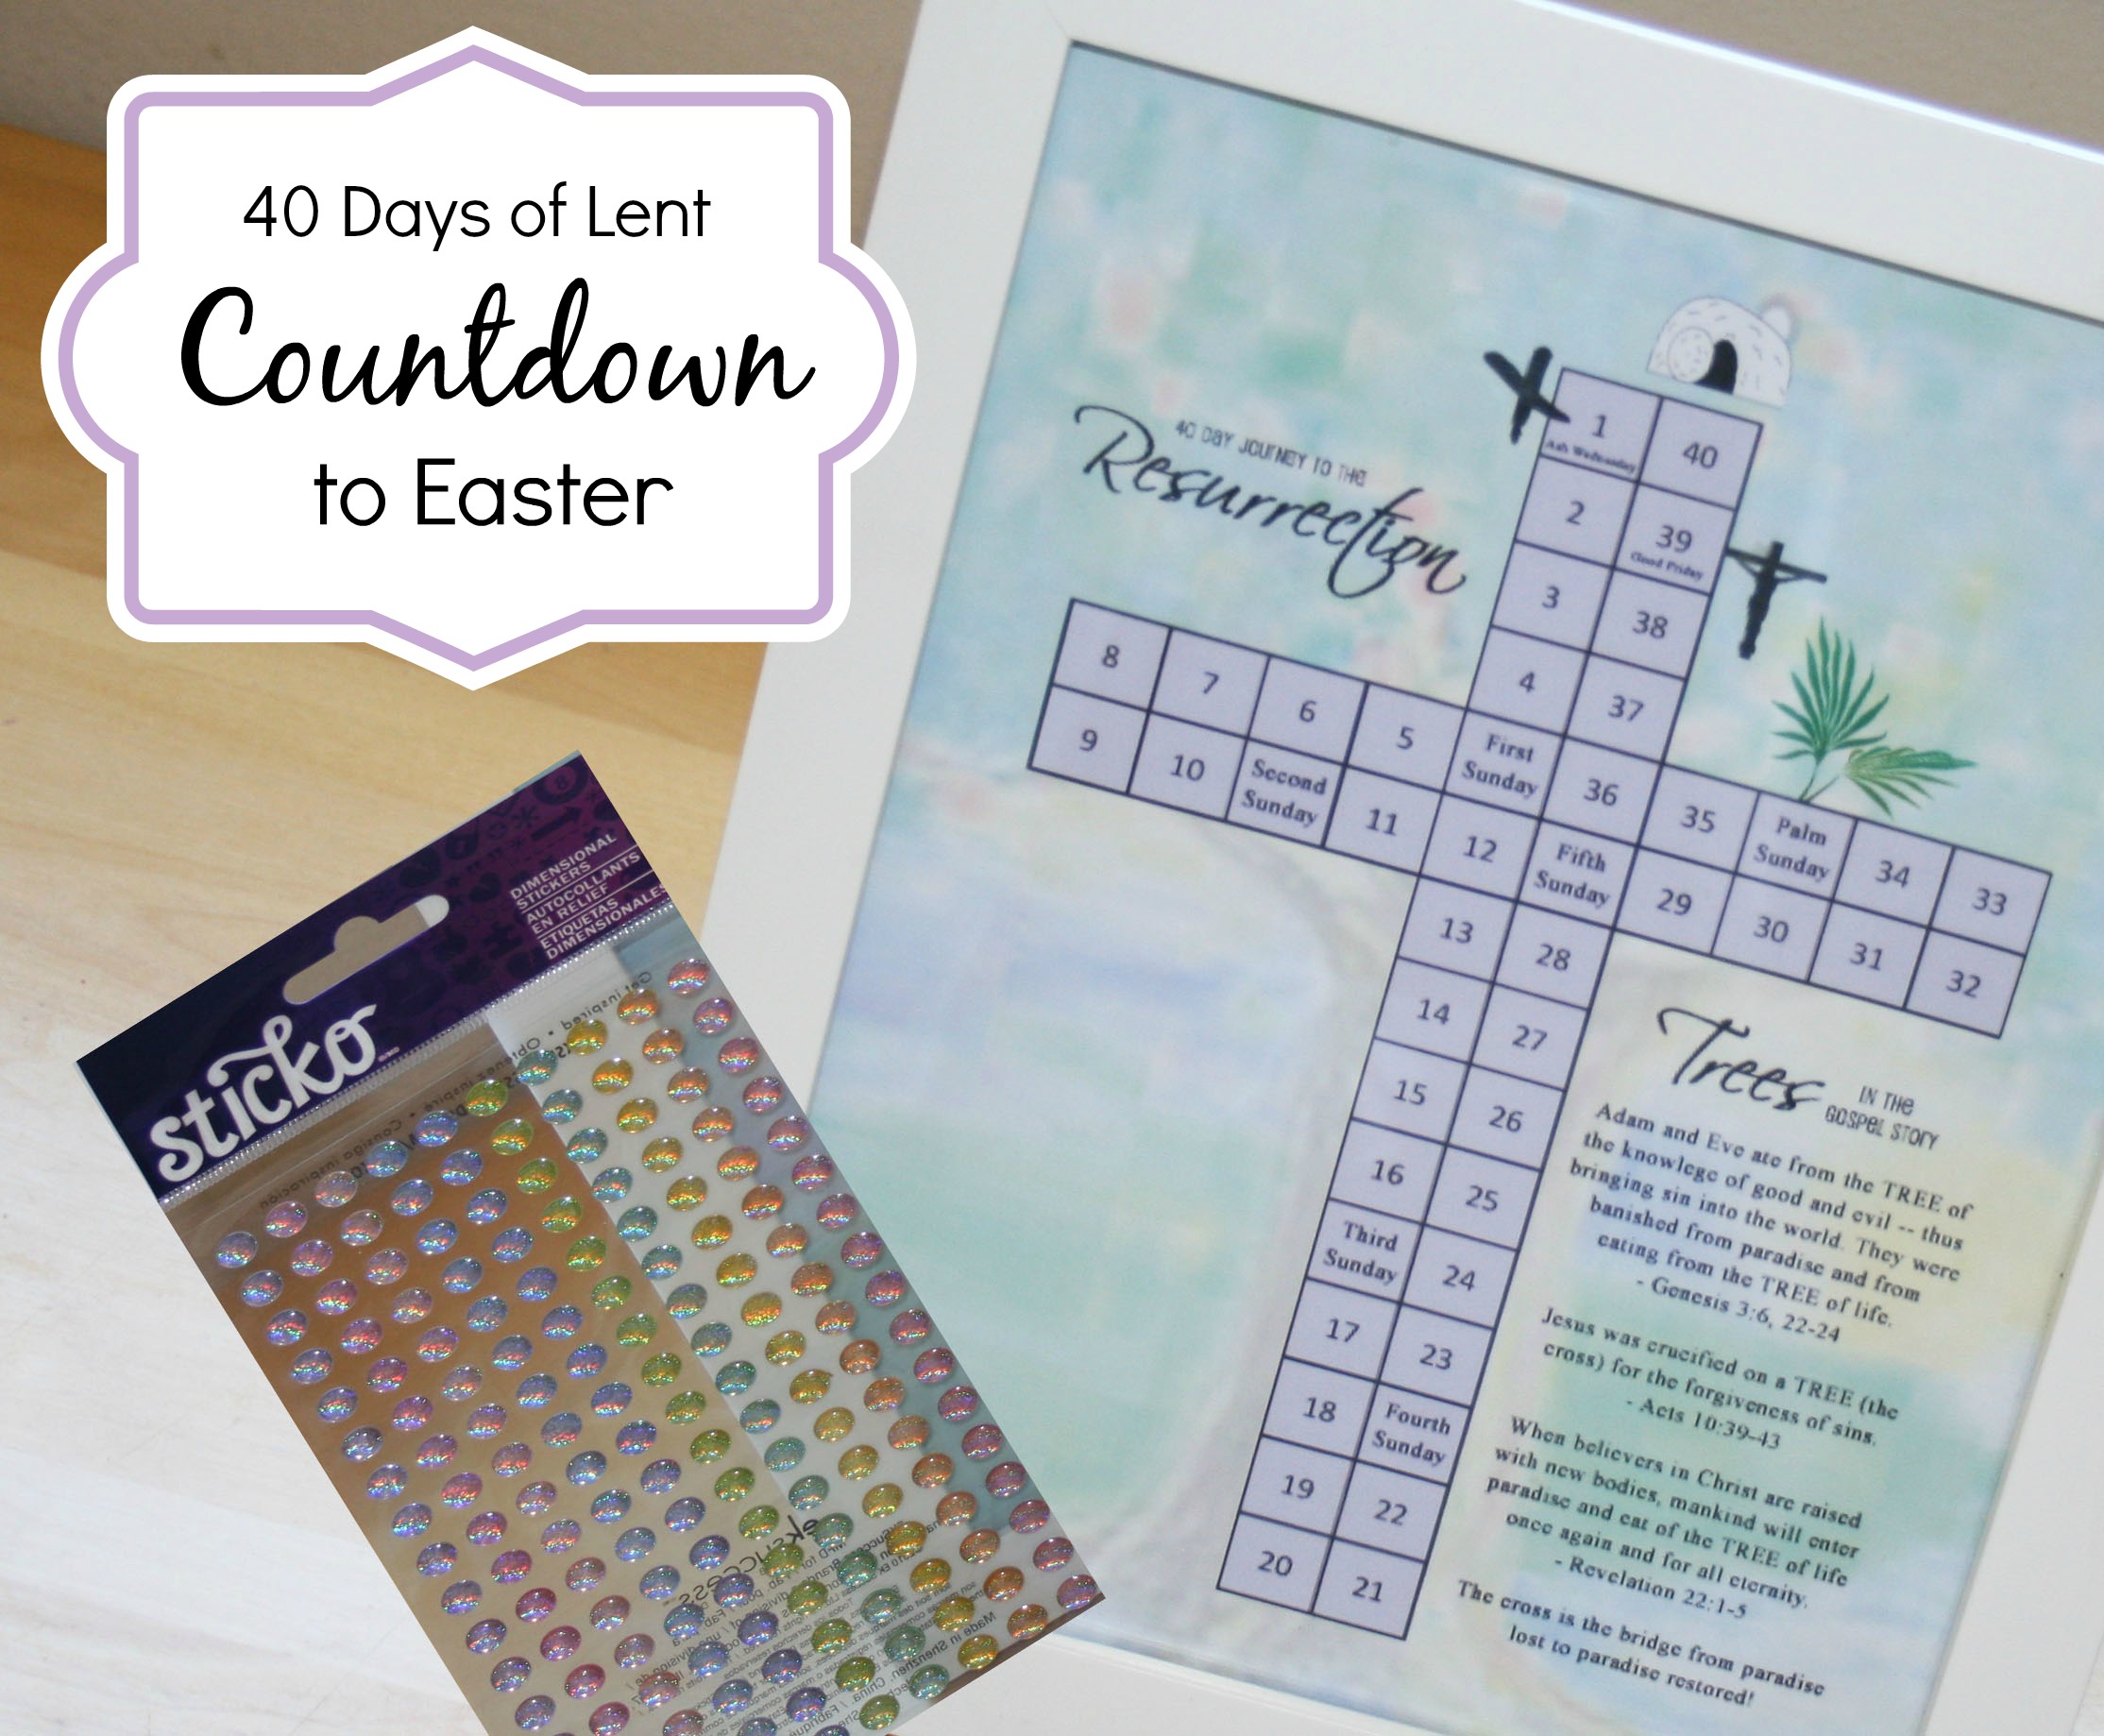 Countdown Calendars for the 40 Days of Lent